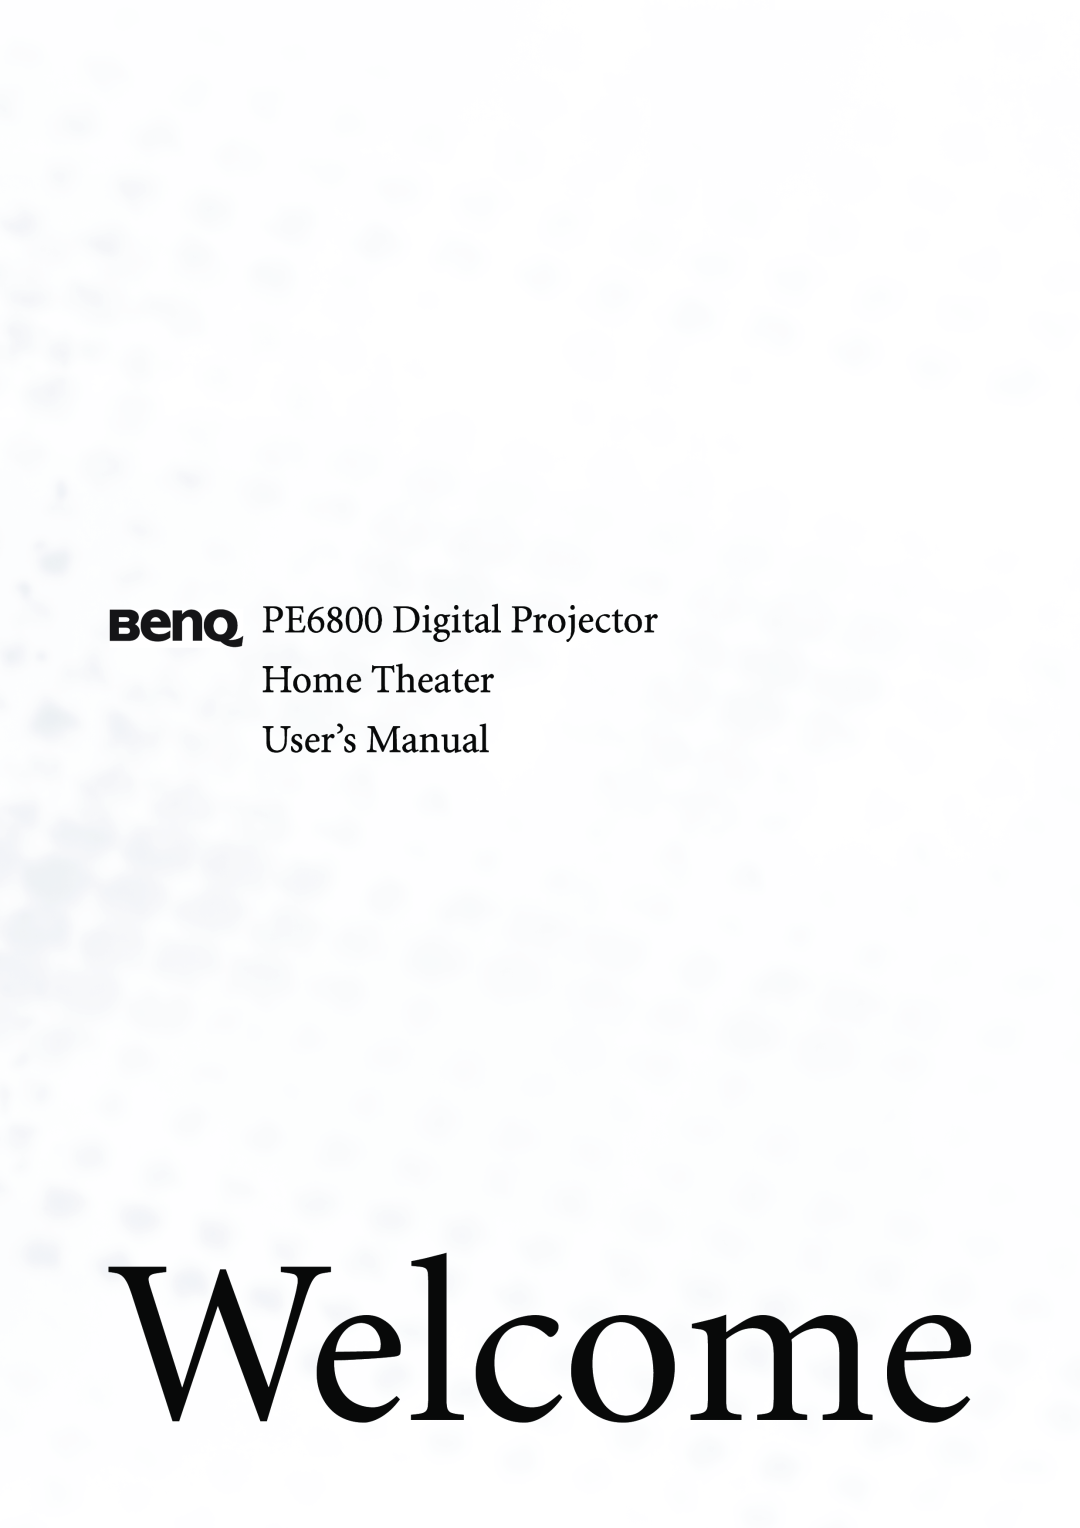 BenQ user manual Welcome, PE6800 Digital Projector Home Theater 